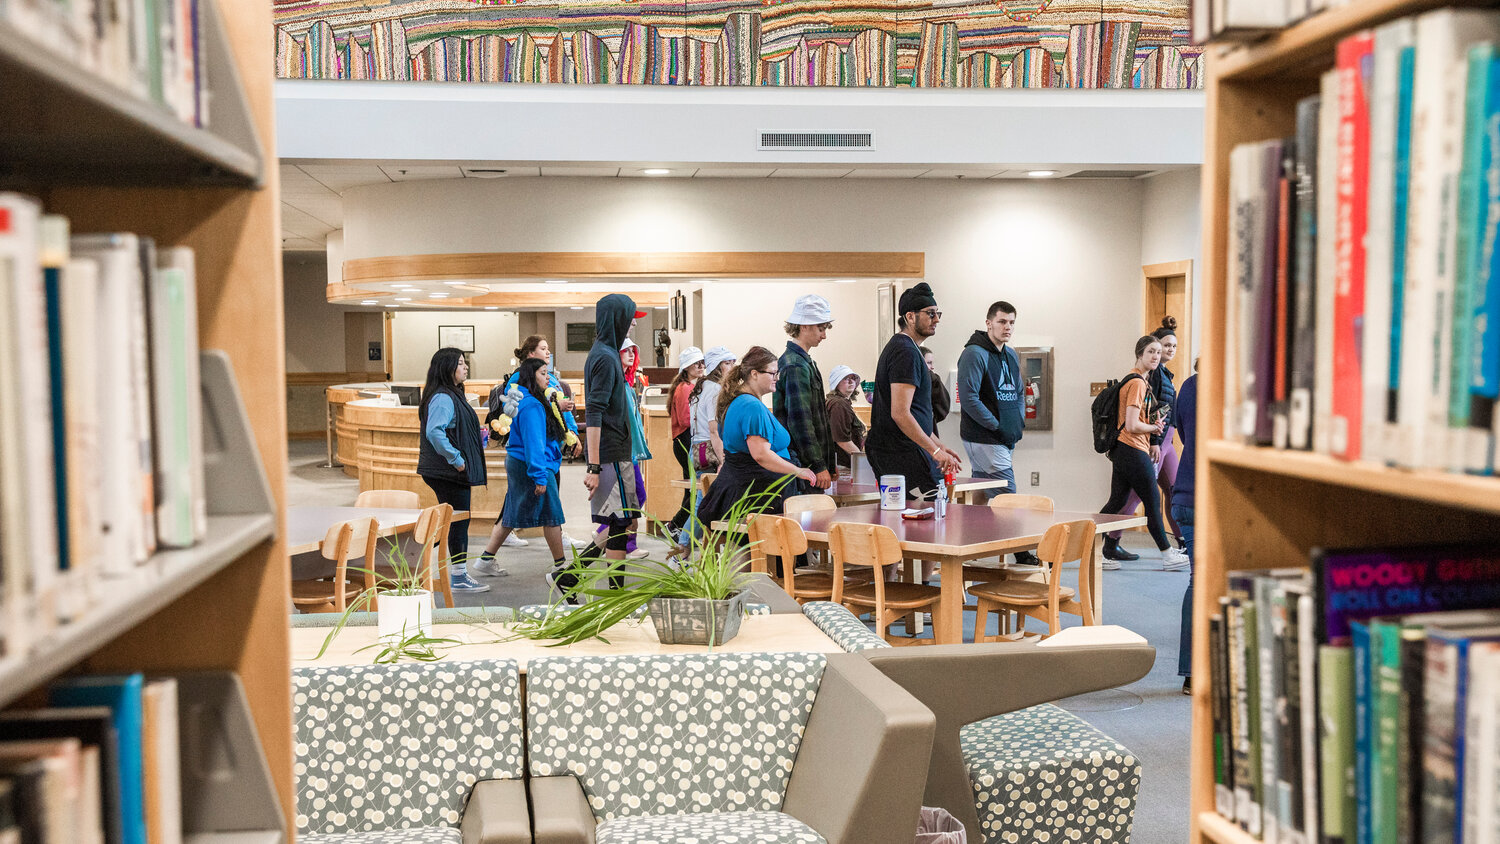 W.F. West students are lead through the Kirk Library at Centralia College on Wednesday, May 24.